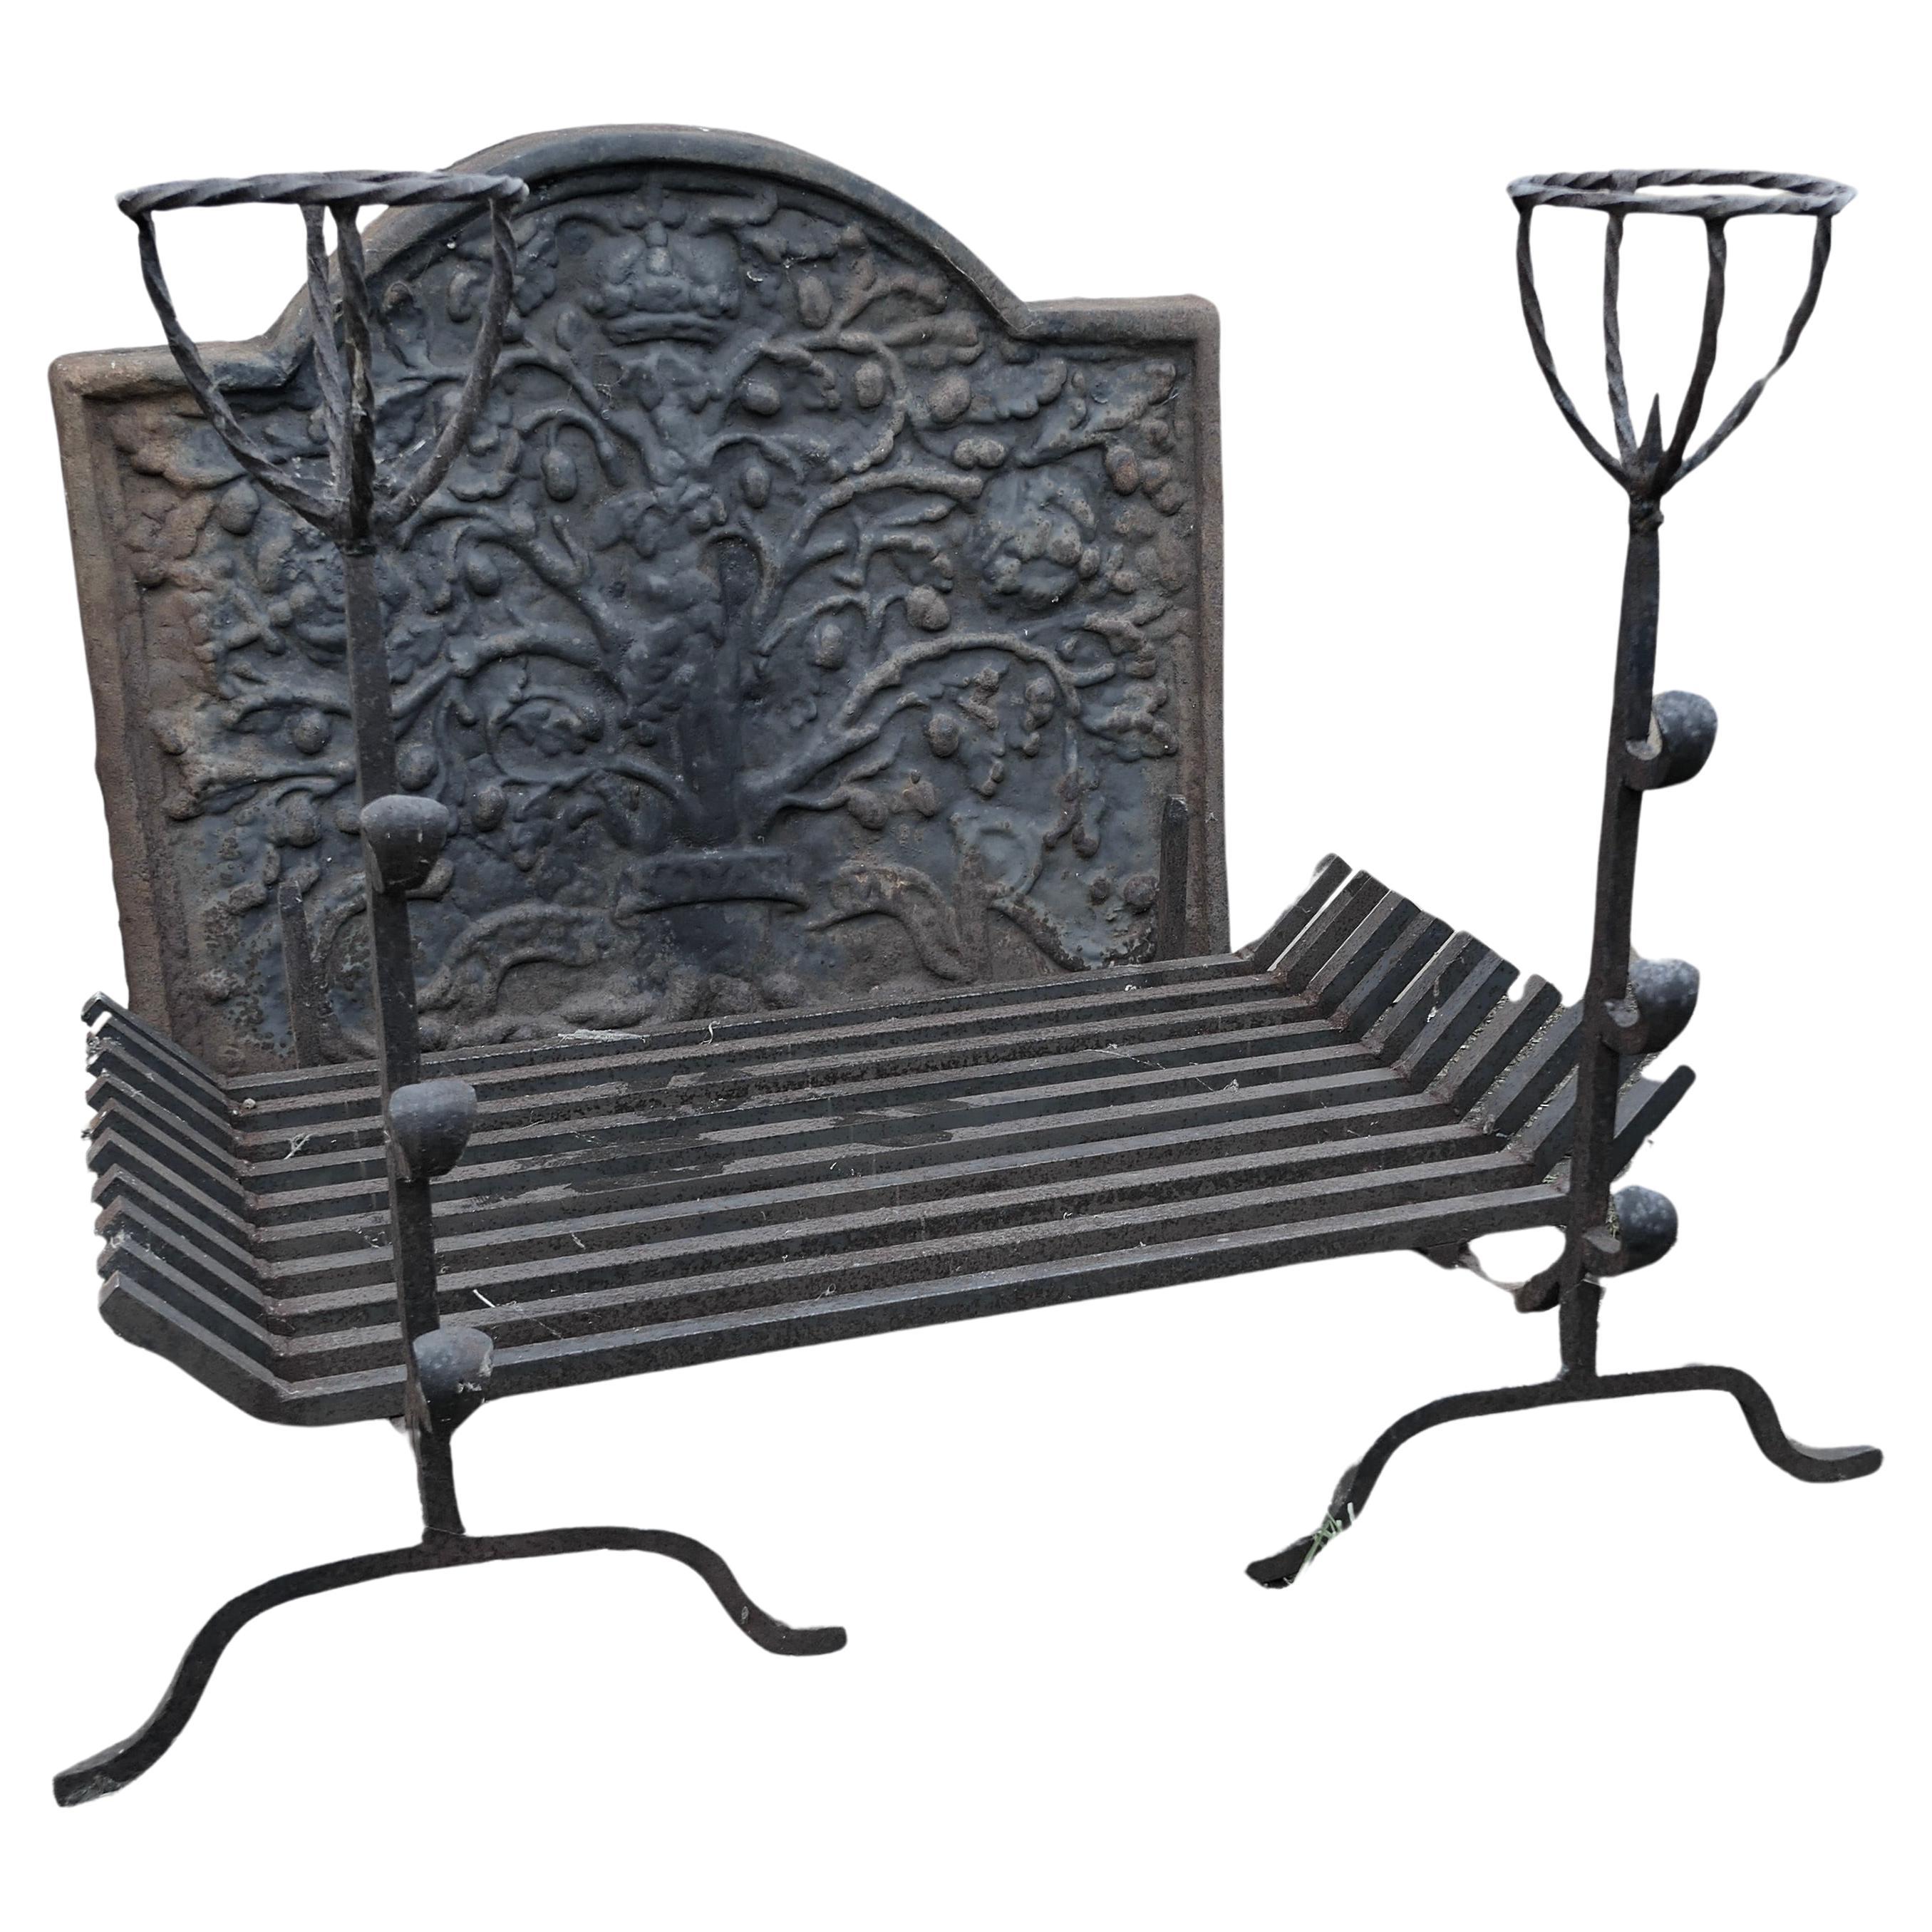  Large 18th Century Heavy Iron Fire Back, Andirons and Grate    For Sale